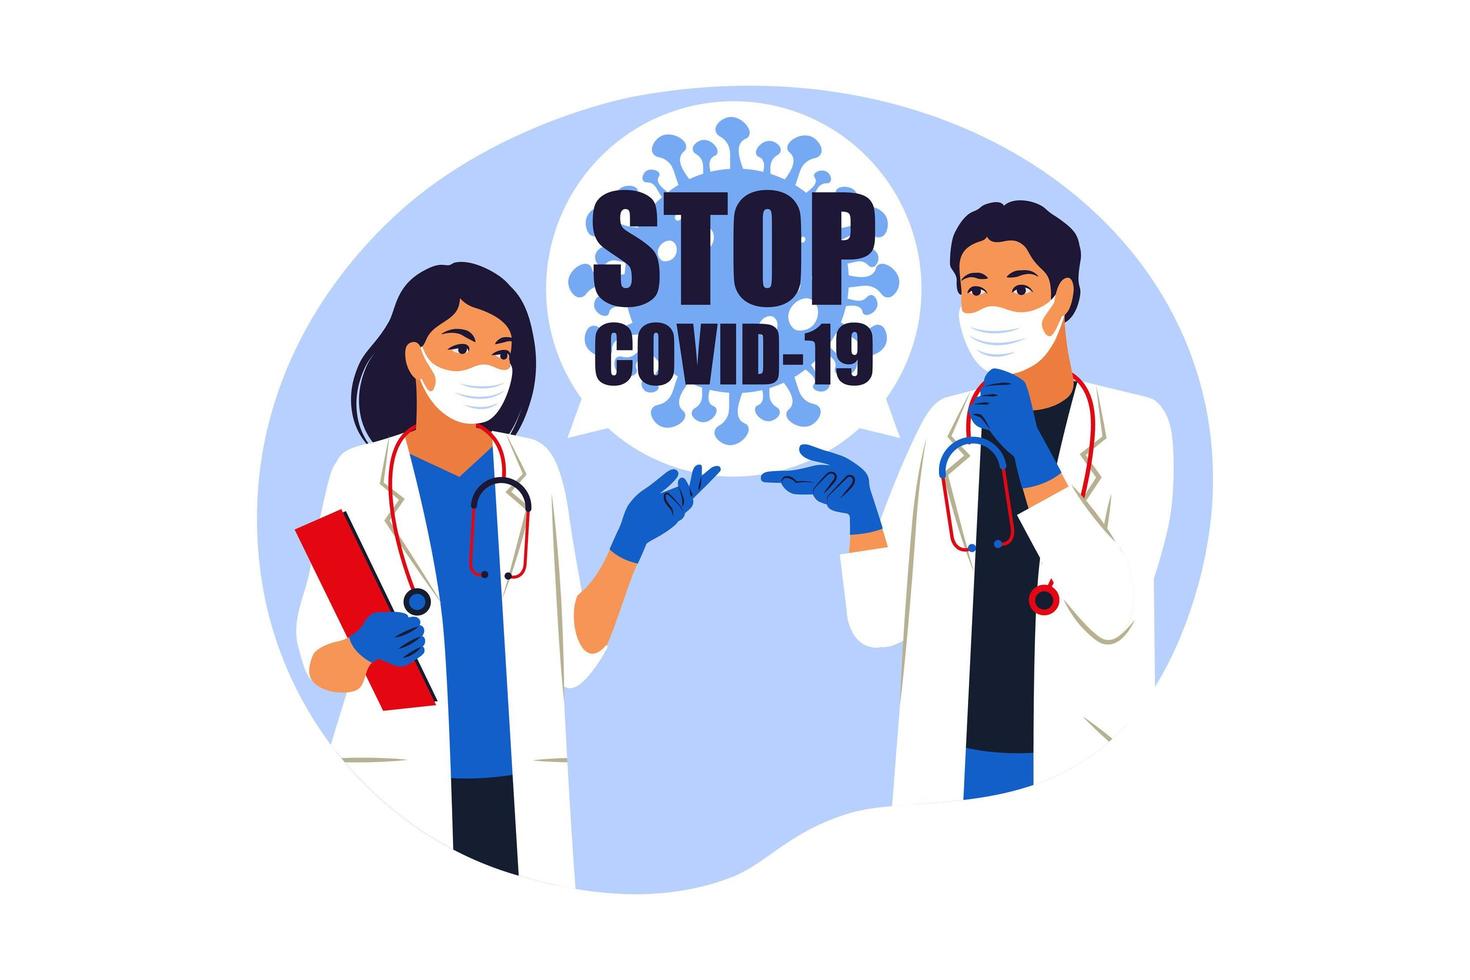 Stop Covid19 virus. New strain of coronavirus. Practitioner young doctors consult and diagnose. Vector illustration. Flat.